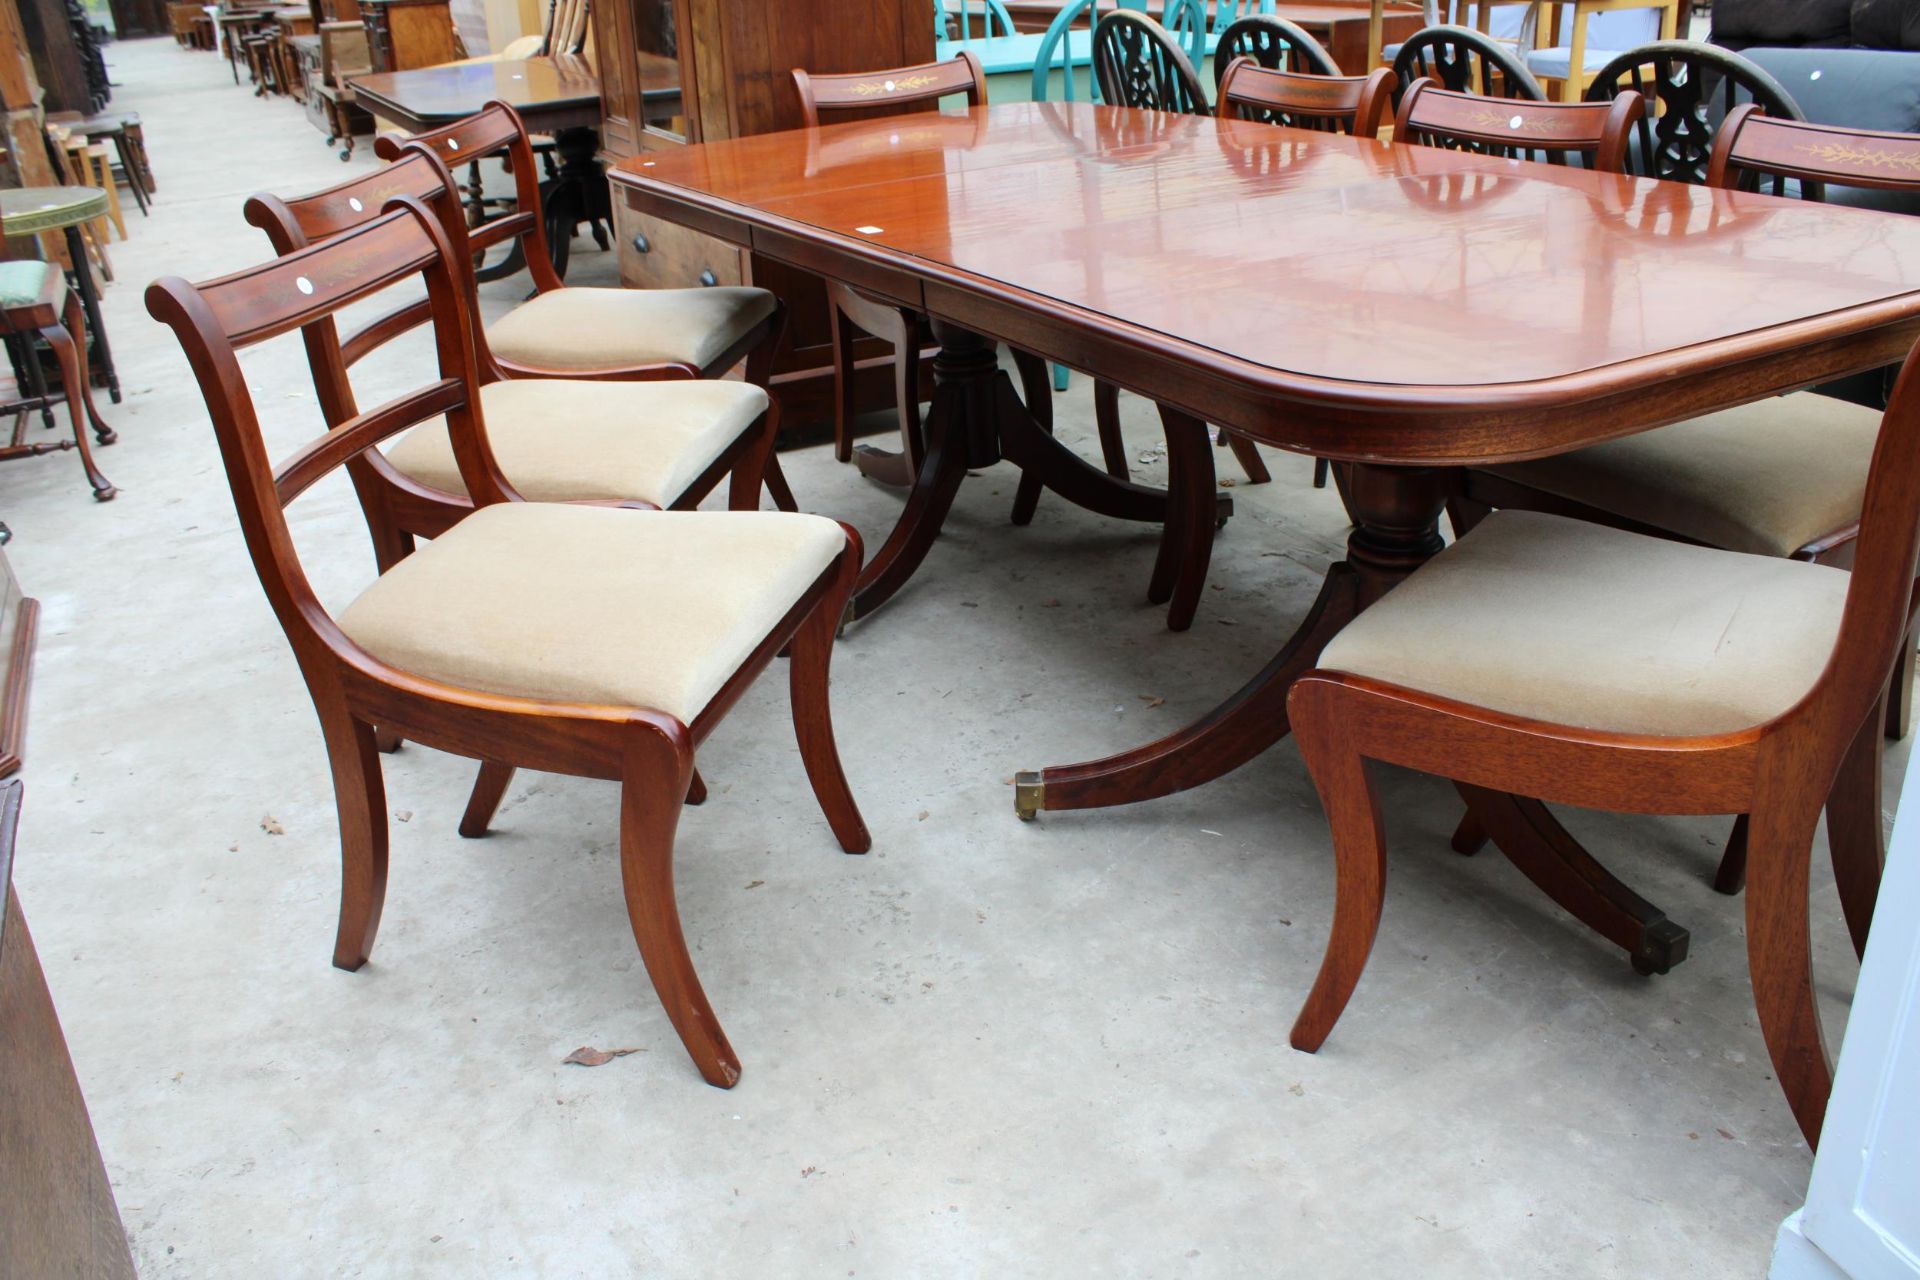 A MAHOGANY REGENCY STYLE EXTENDING TWIN PEDESTAL DINING TABLE 62" X 38" (LEAF 21") AND SIX BRASS - Image 3 of 6